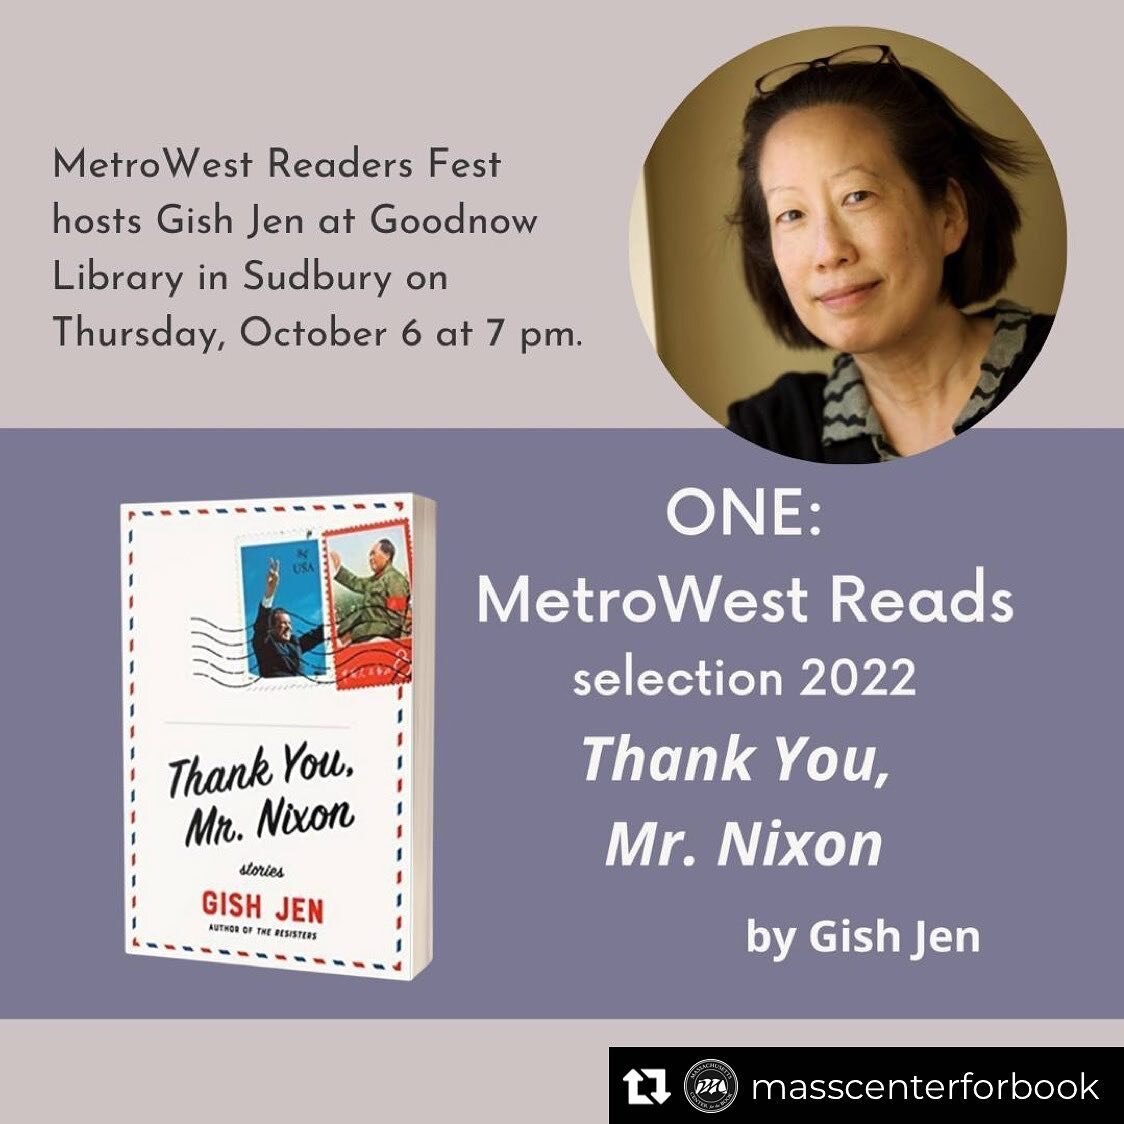 Thank you for sharing, @masscenterforbook 

Repost from @masscenterforbook
&bull;
@MetroWestReadersFest is happy to host @GishJen at @GoodnowLibrary in Sudbury on October 6 at 7 pm. There will be an option to tune in virtually as well. In addition to